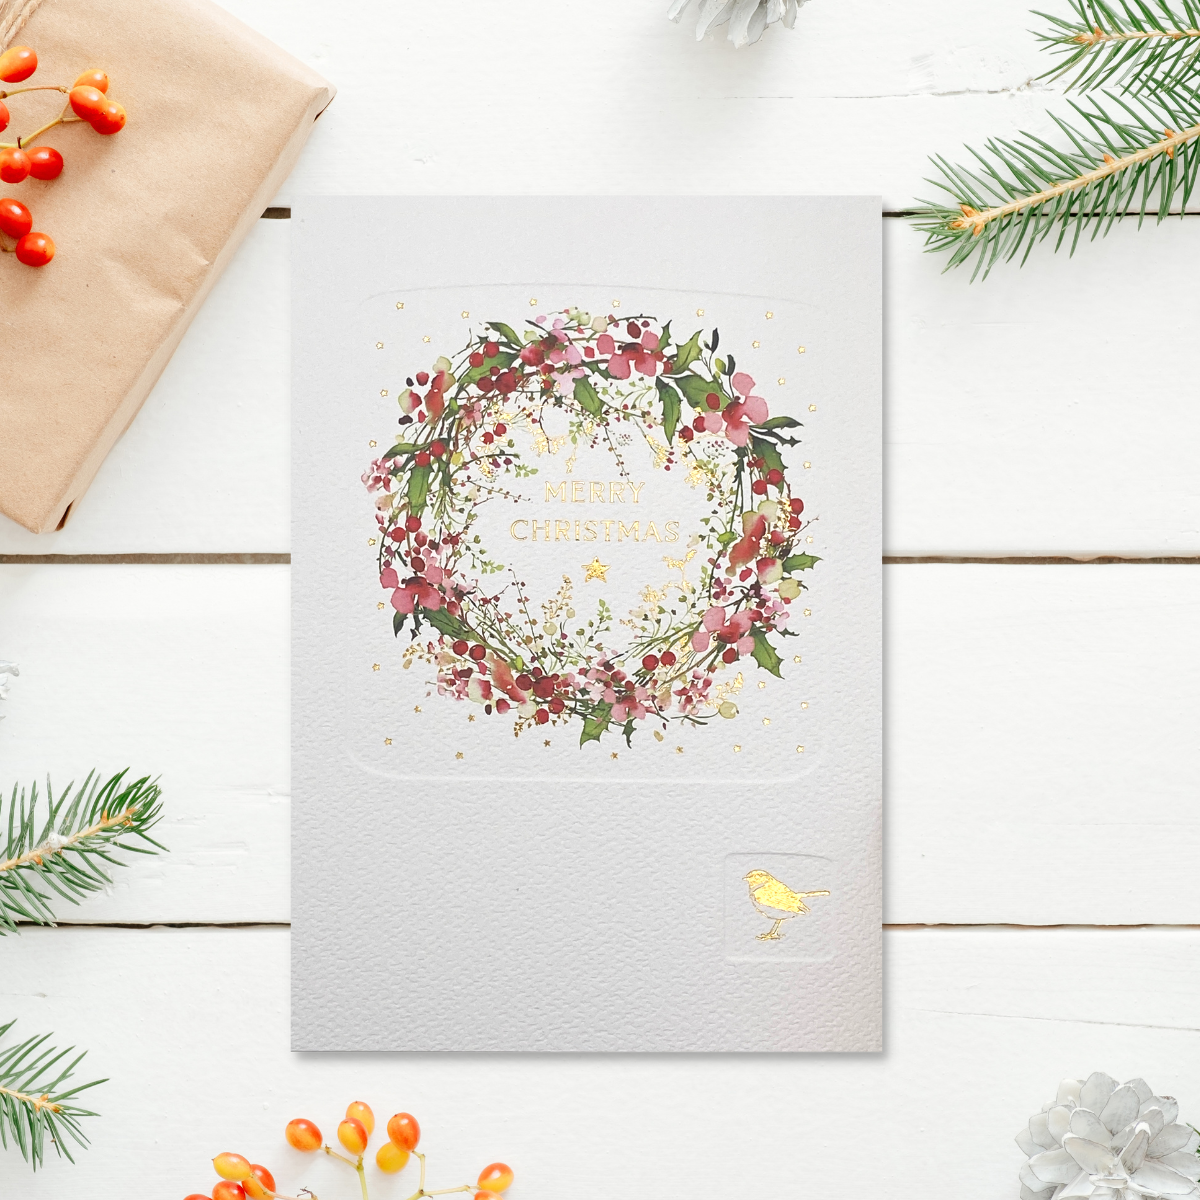 Floral wreath with gold text and robin on white embossed card